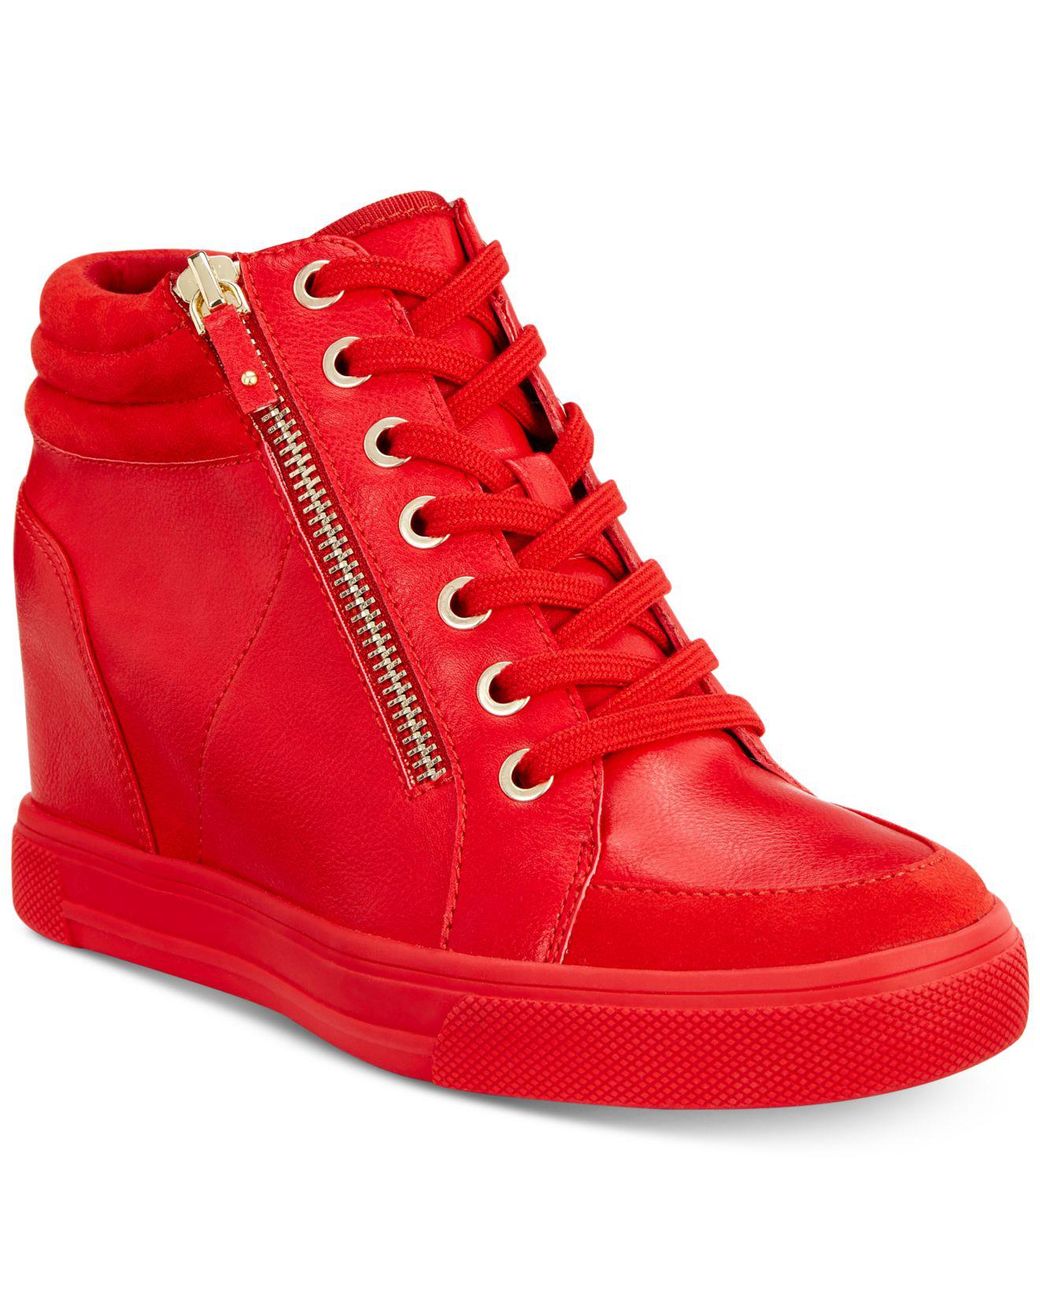 gemak coupon bewijs ALDO Kaia Lace-up Wedge Sneakers in Red | Lyst